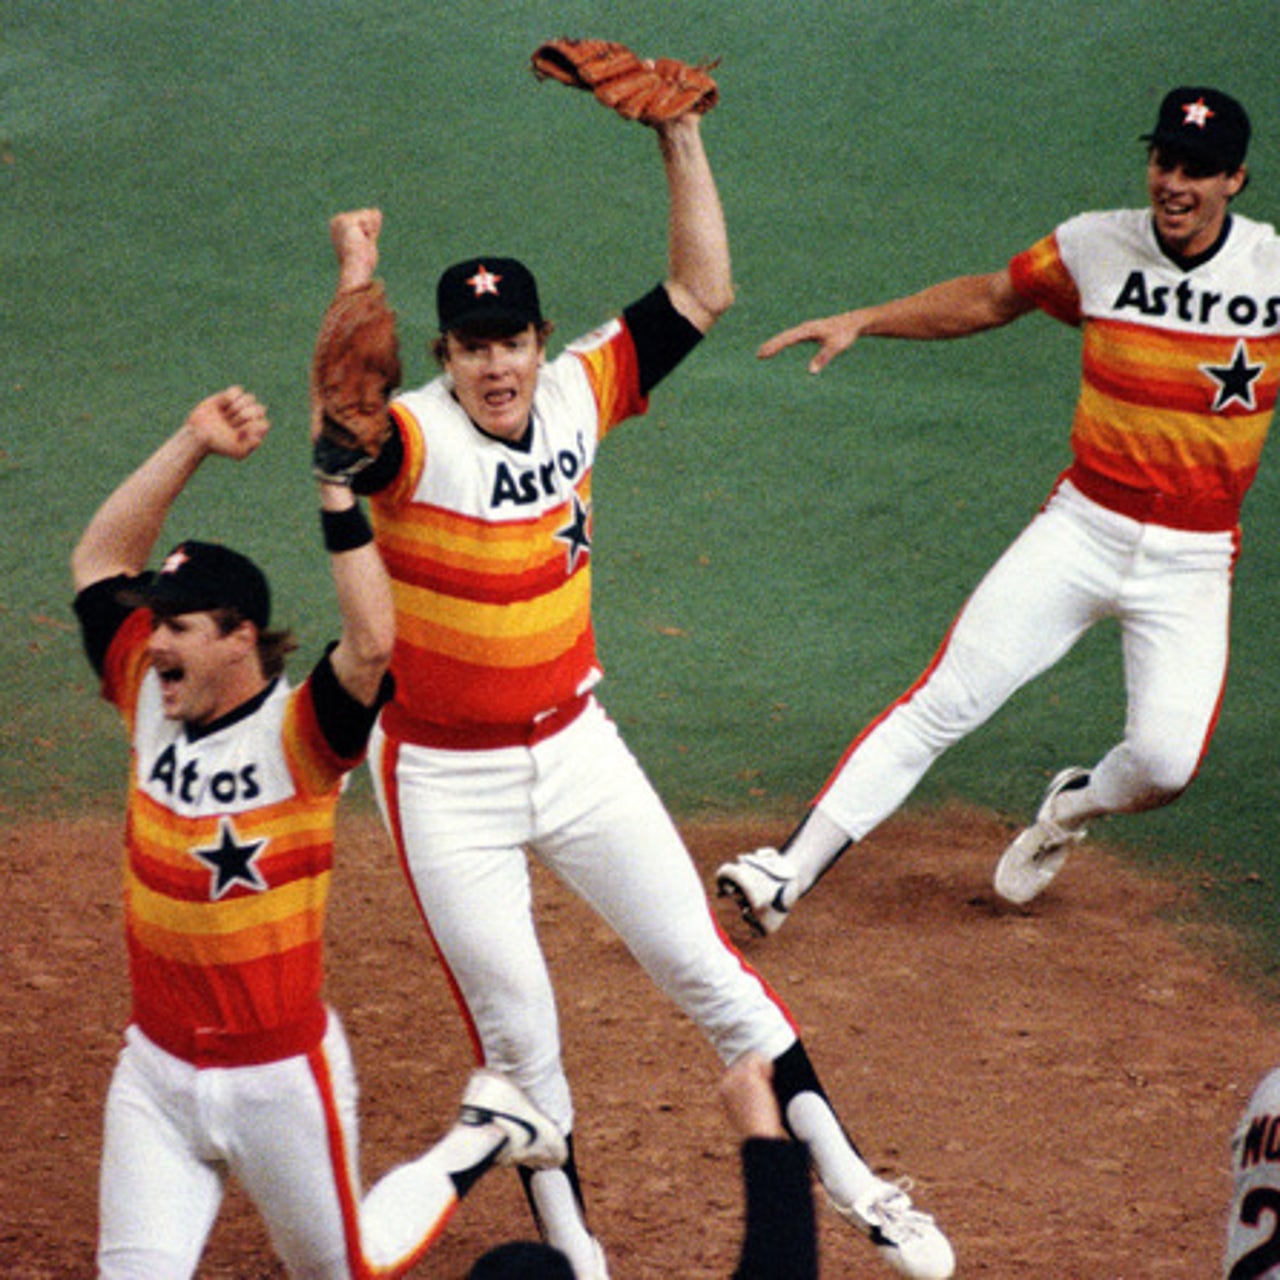 The history of Houston's iconic rainbow uniforms is a story worth